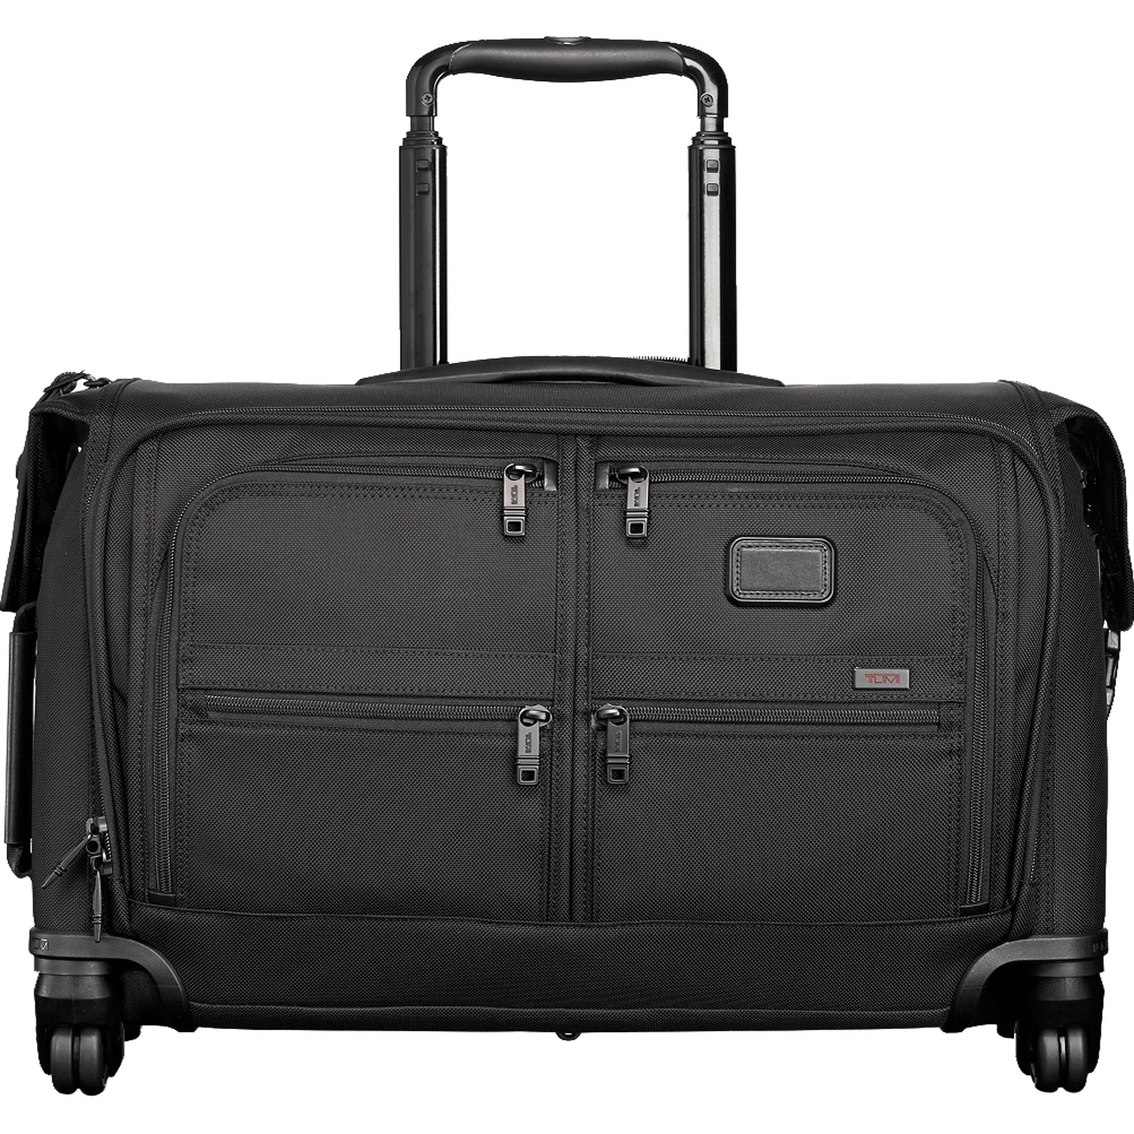 Tumi Luggage Outlet | Division of Global Affairs